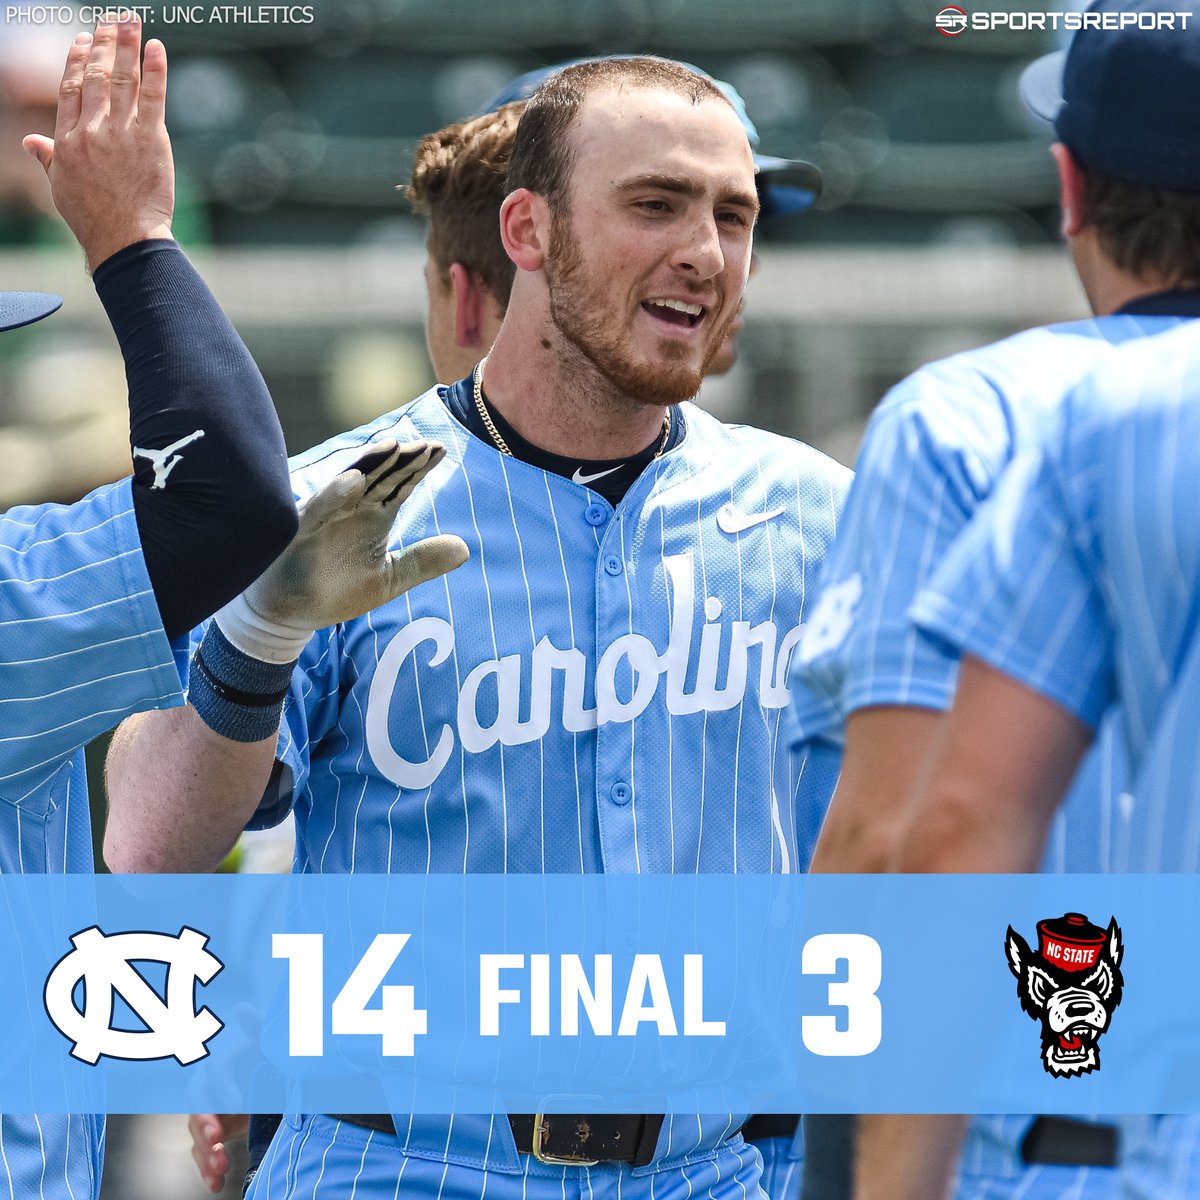 #TARHEELS WIN!!! #UNC crushes NC State on the road!!